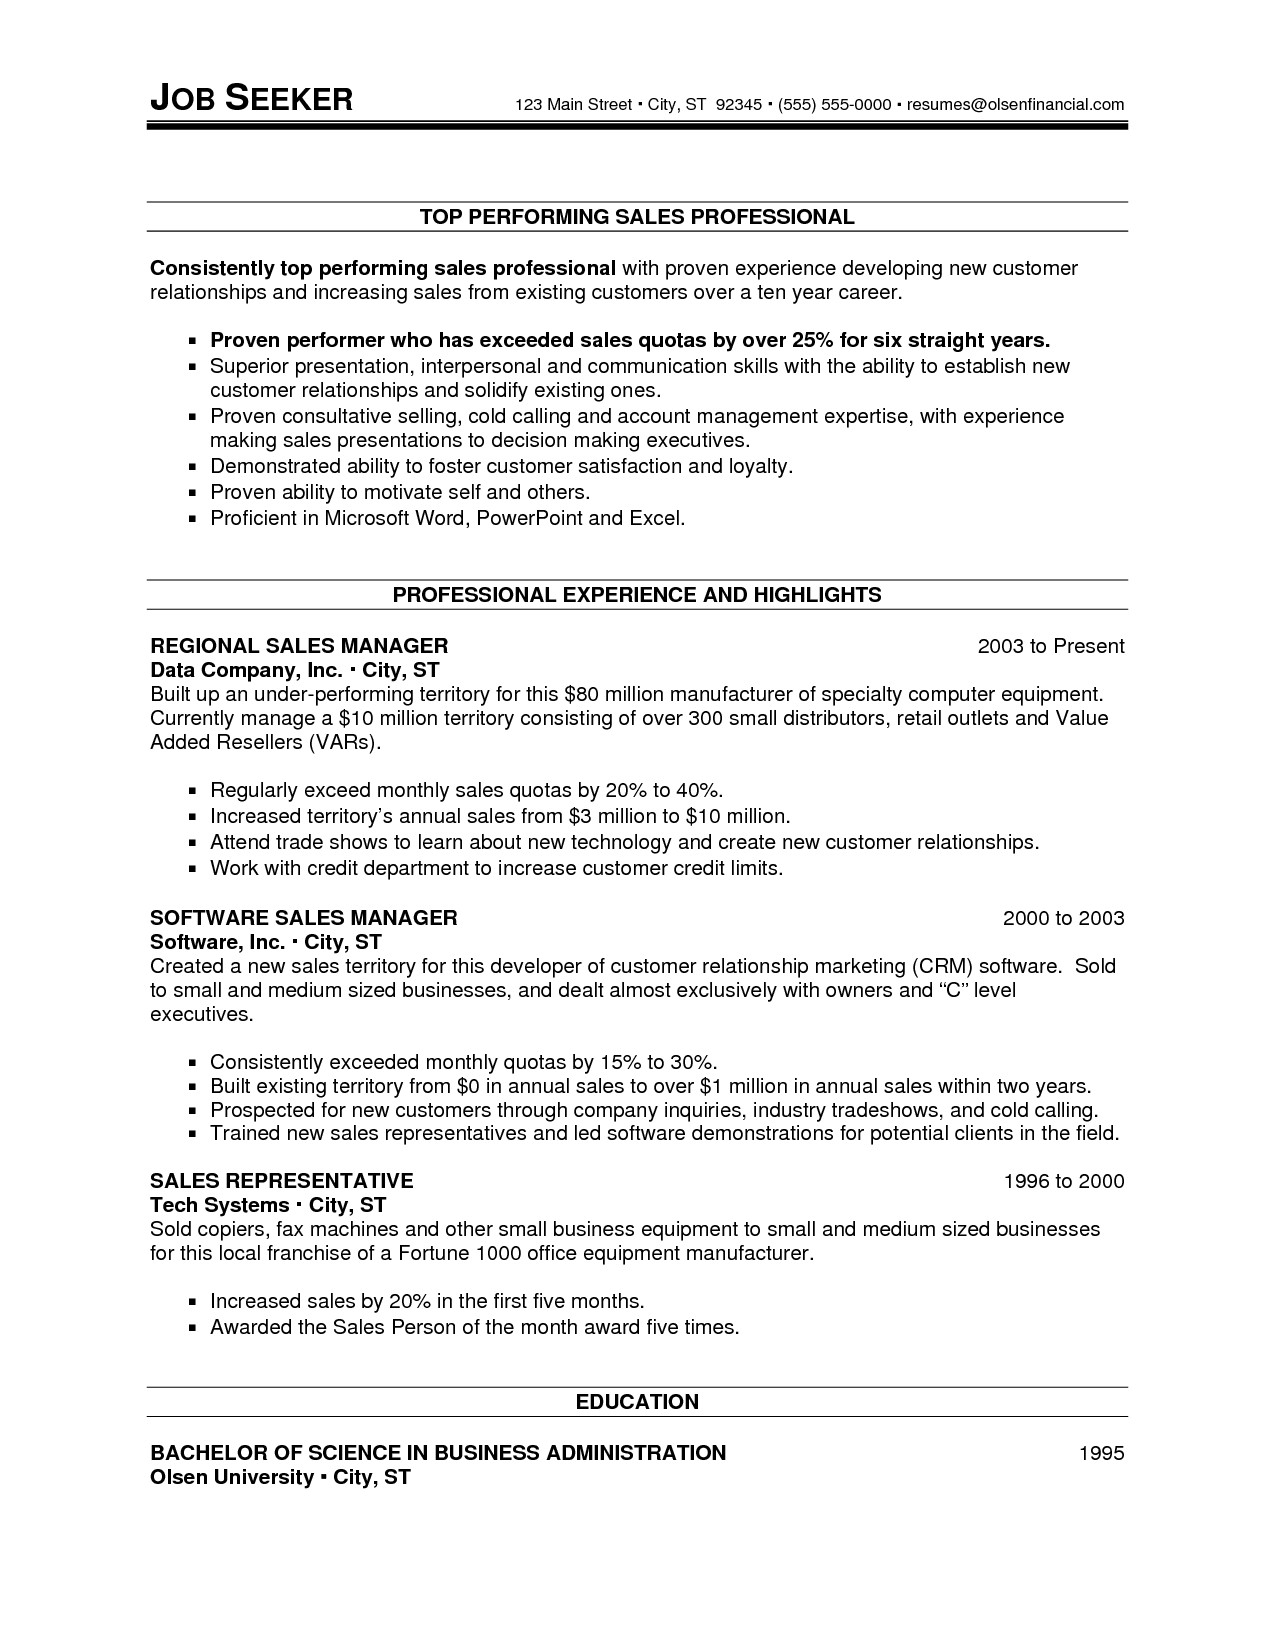 resume format 20 years experience